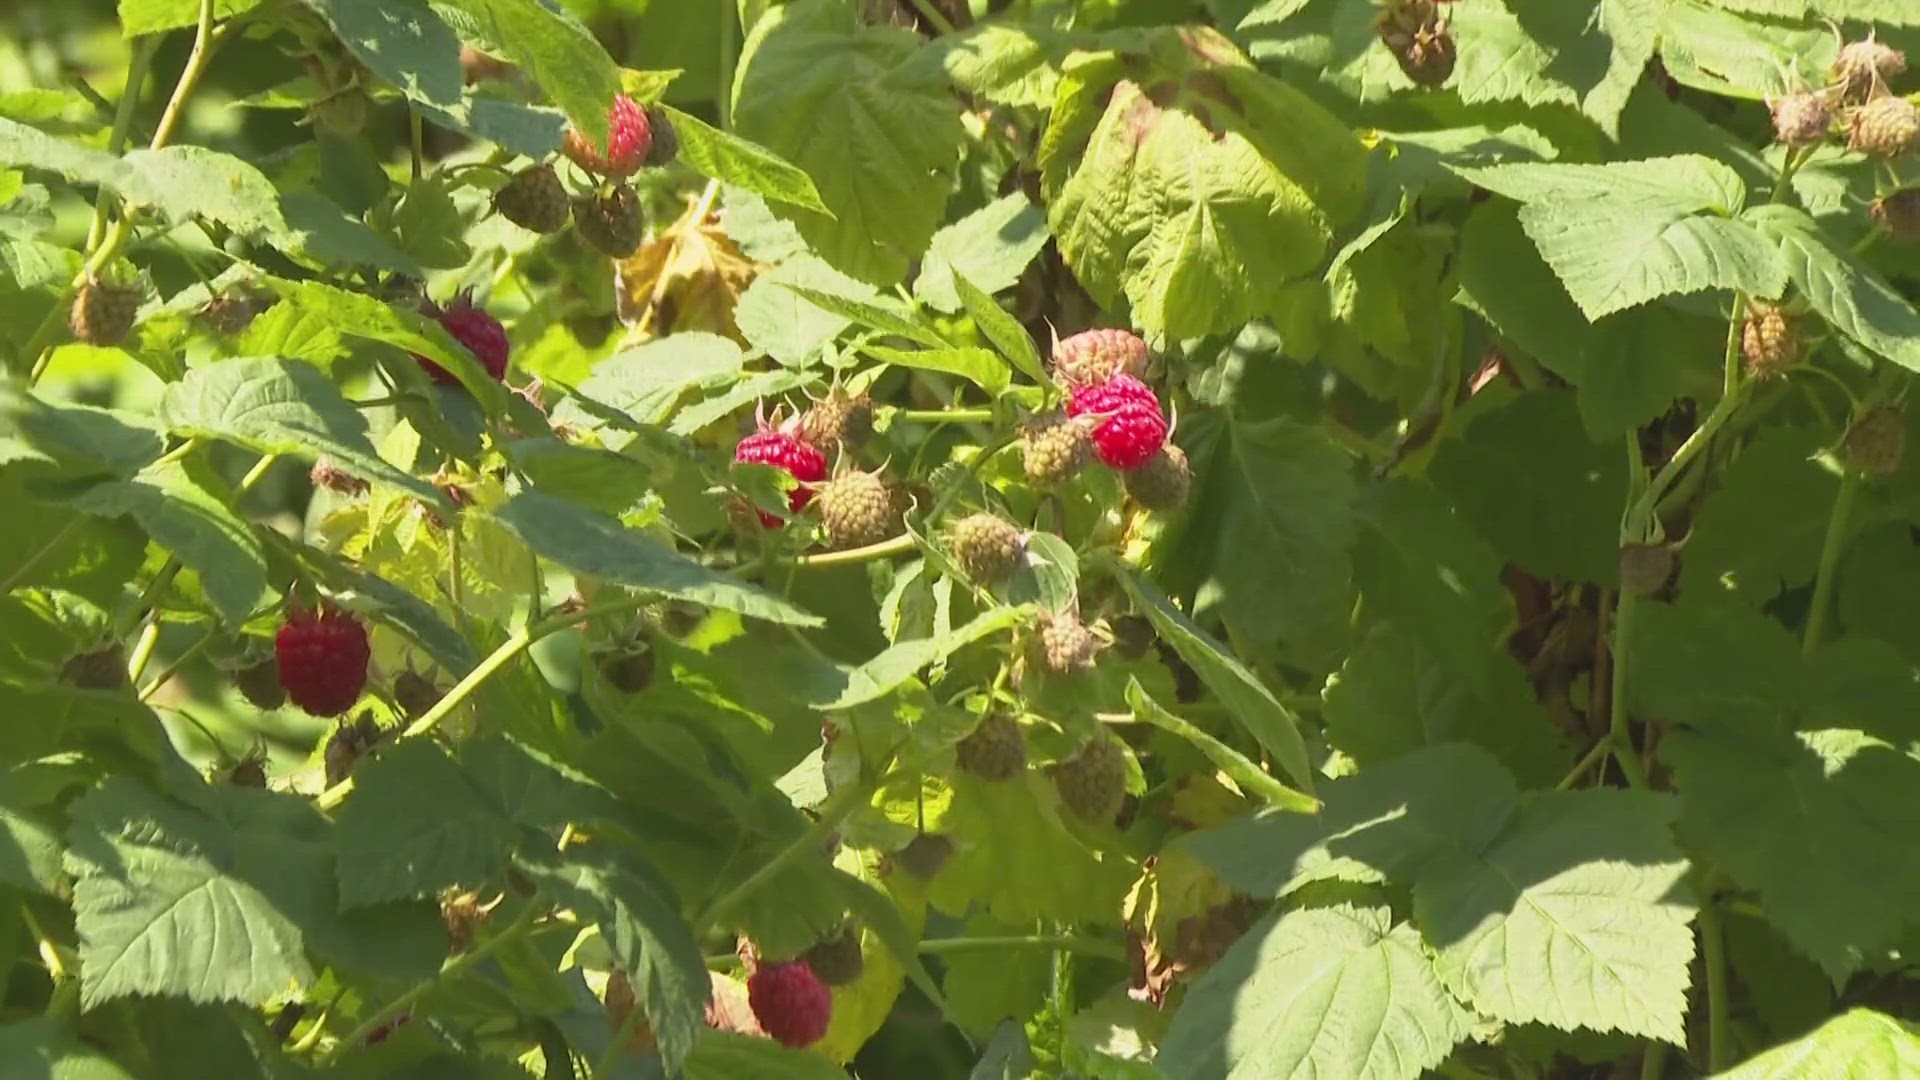 This summer, along with a rough winter and spring, has impacted berry farms in Maine.